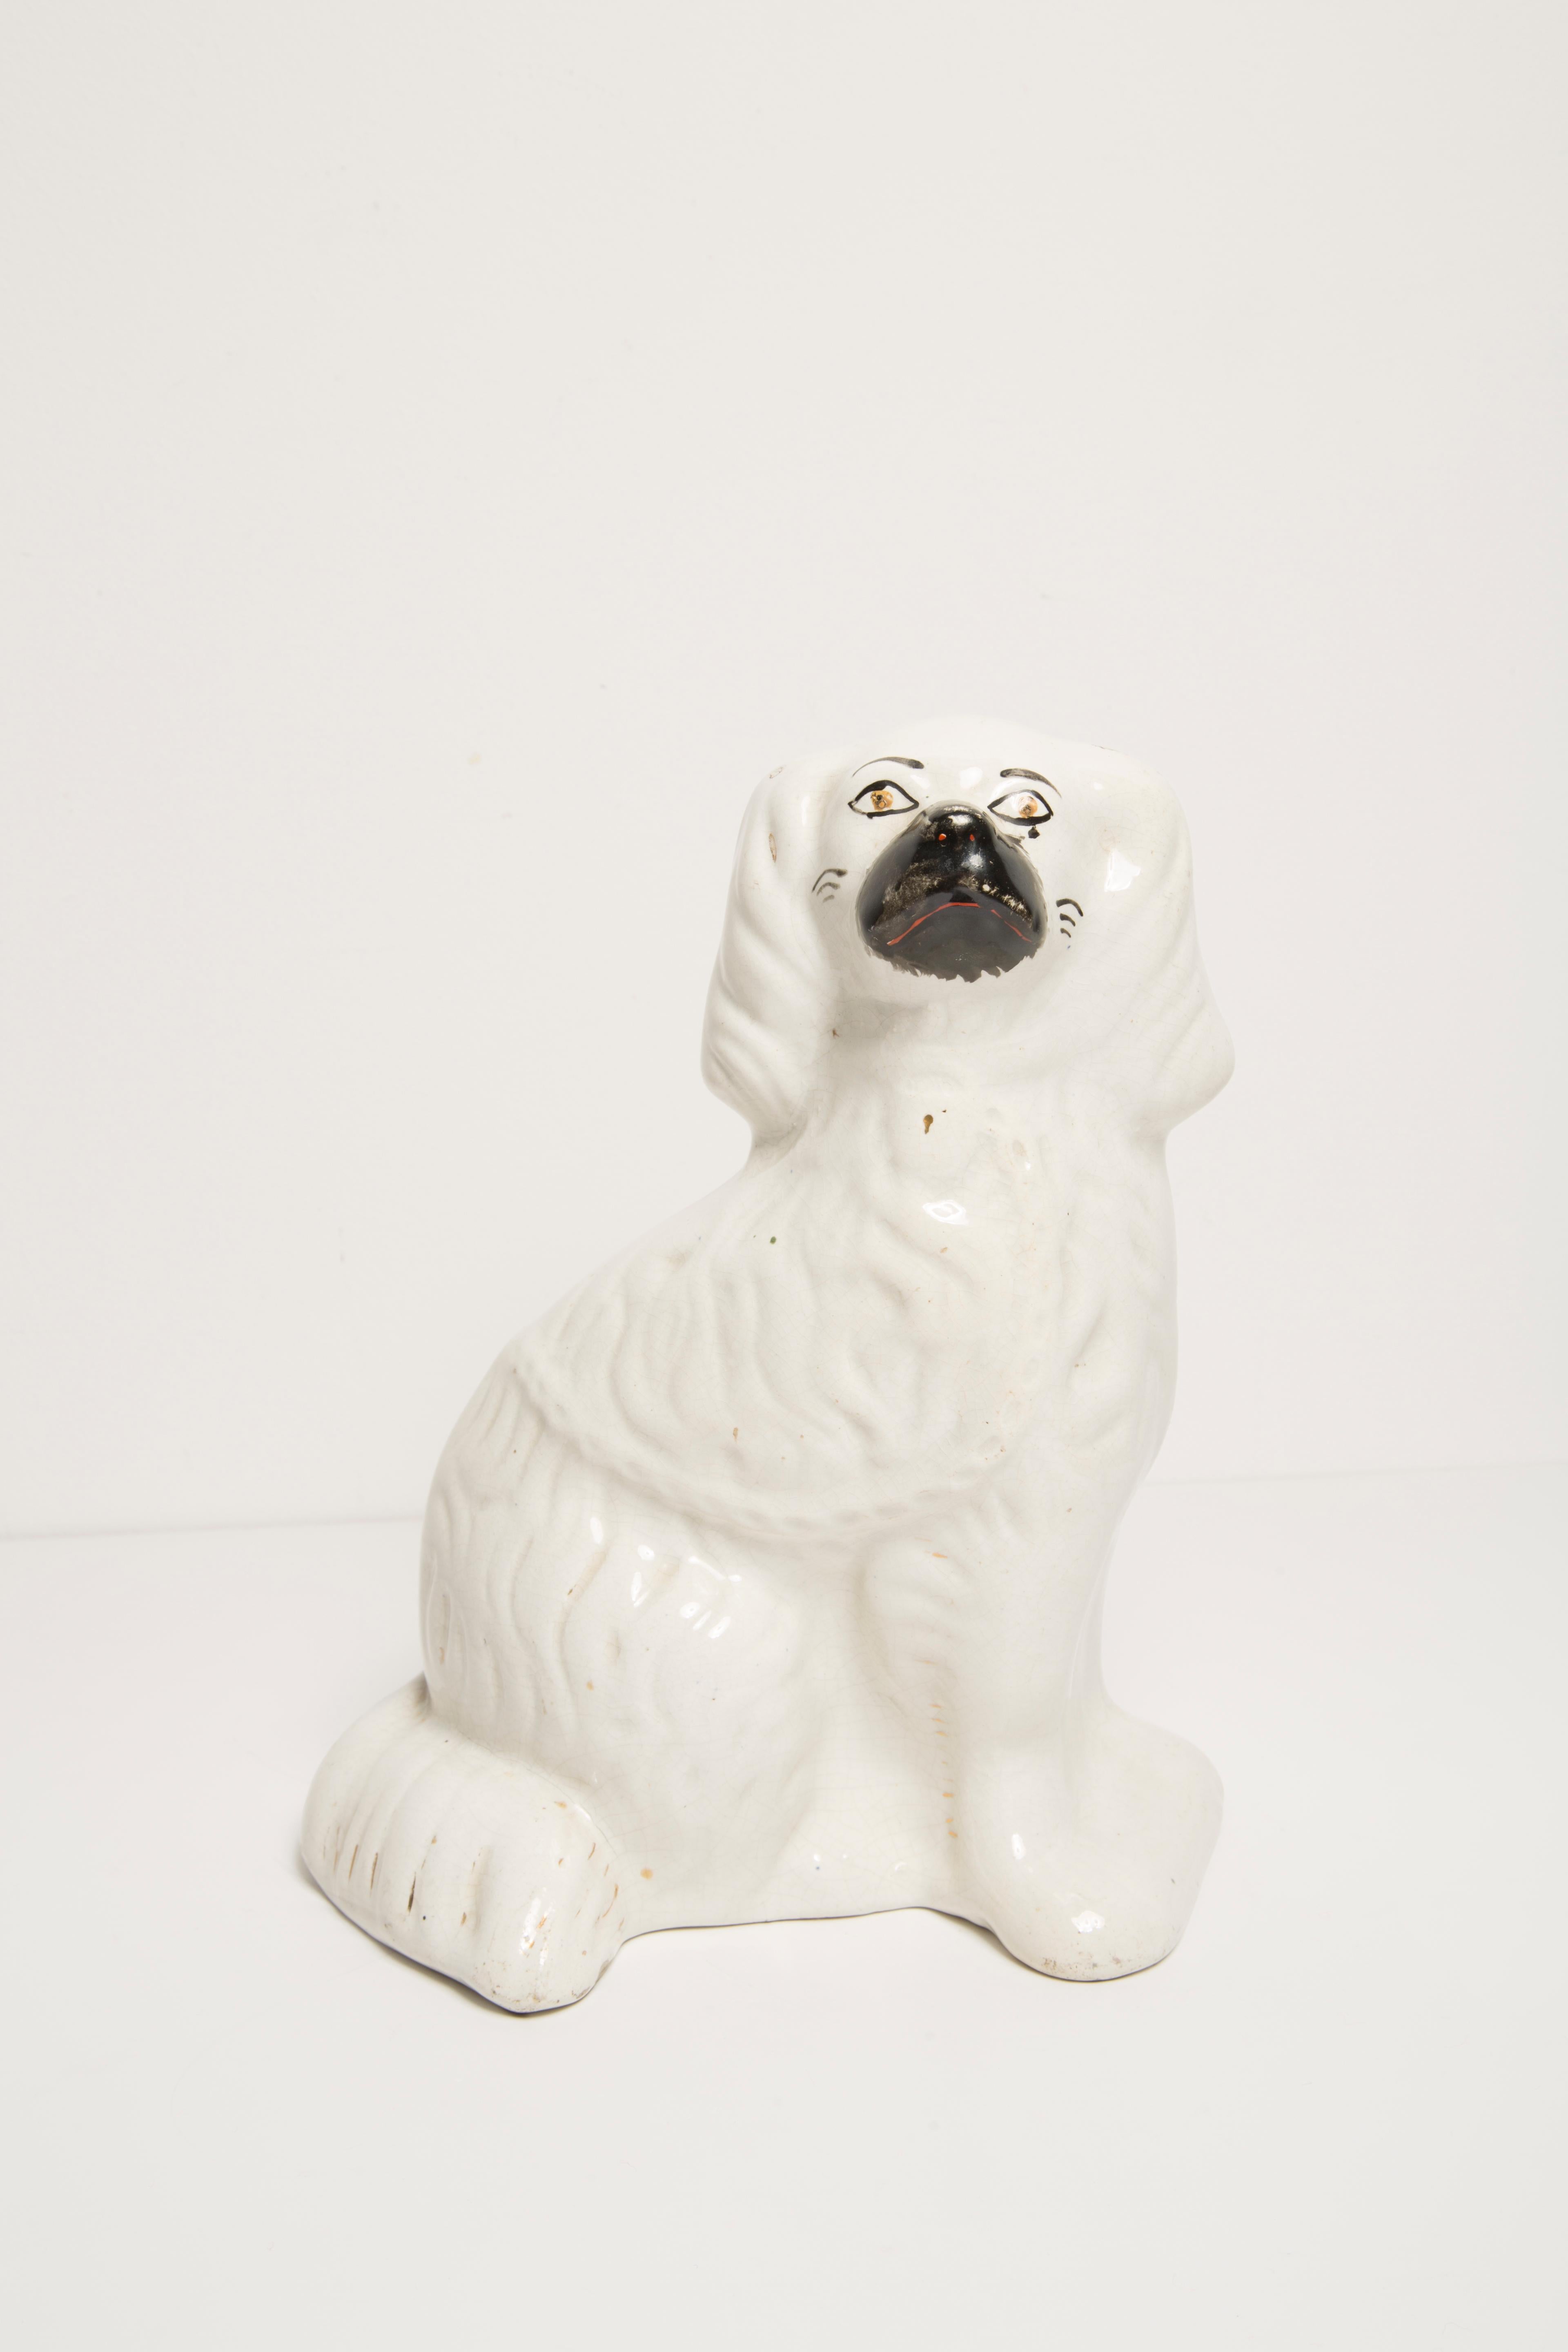 Painted ceramic, good original vintage condition. Beautiful and unique decorative sculptures. Yorkshire Dogs Sculpture was produced in Staffordshire, England in 1960s. Only one dog is available.